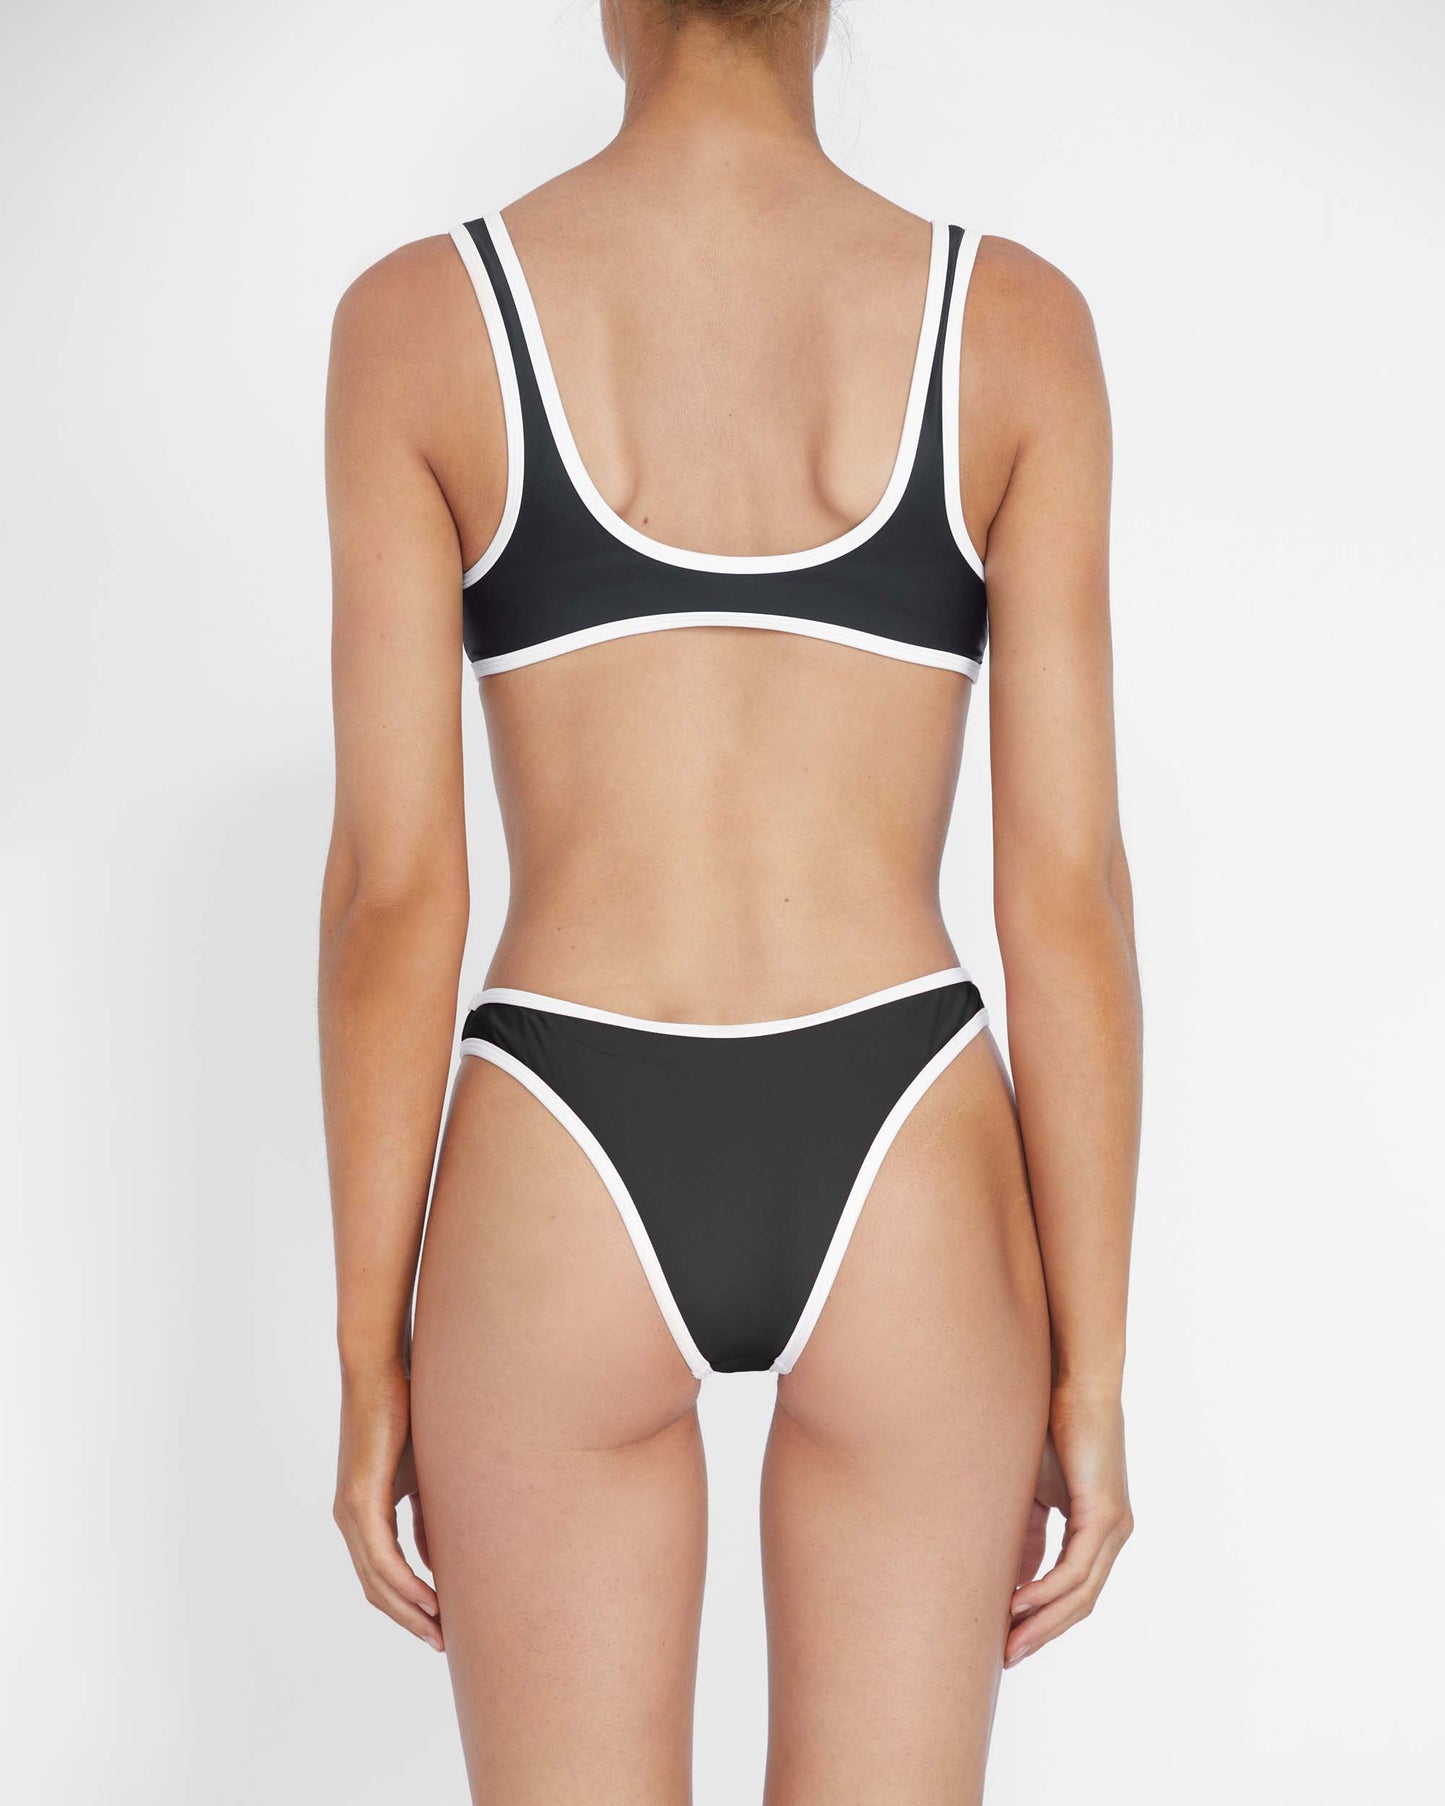 It's Now Cool Swimwear - 90s Duo Pant - Black & White Contrast